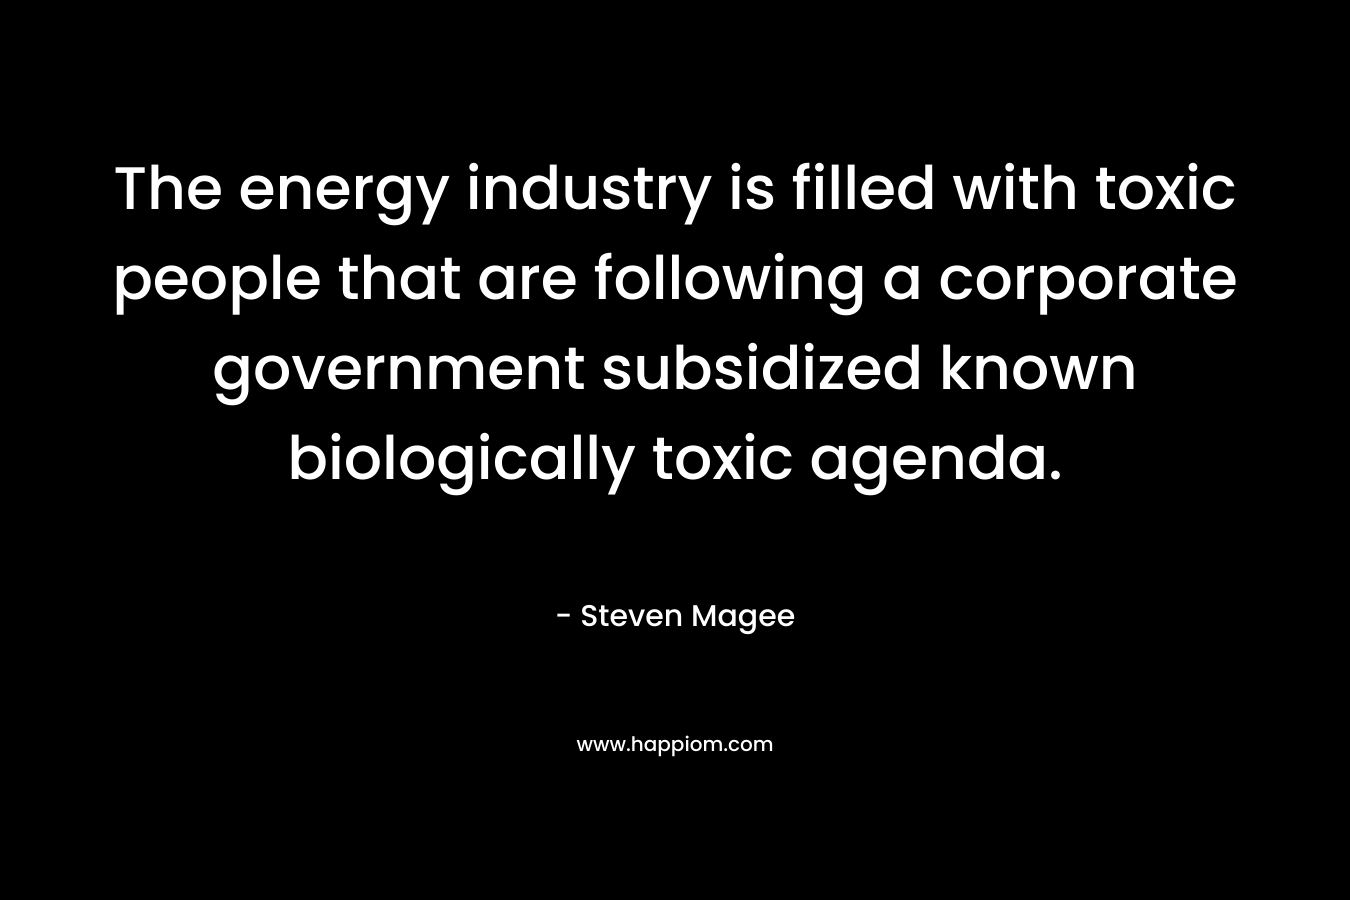 The energy industry is filled with toxic people that are following a corporate government subsidized known biologically toxic agenda.